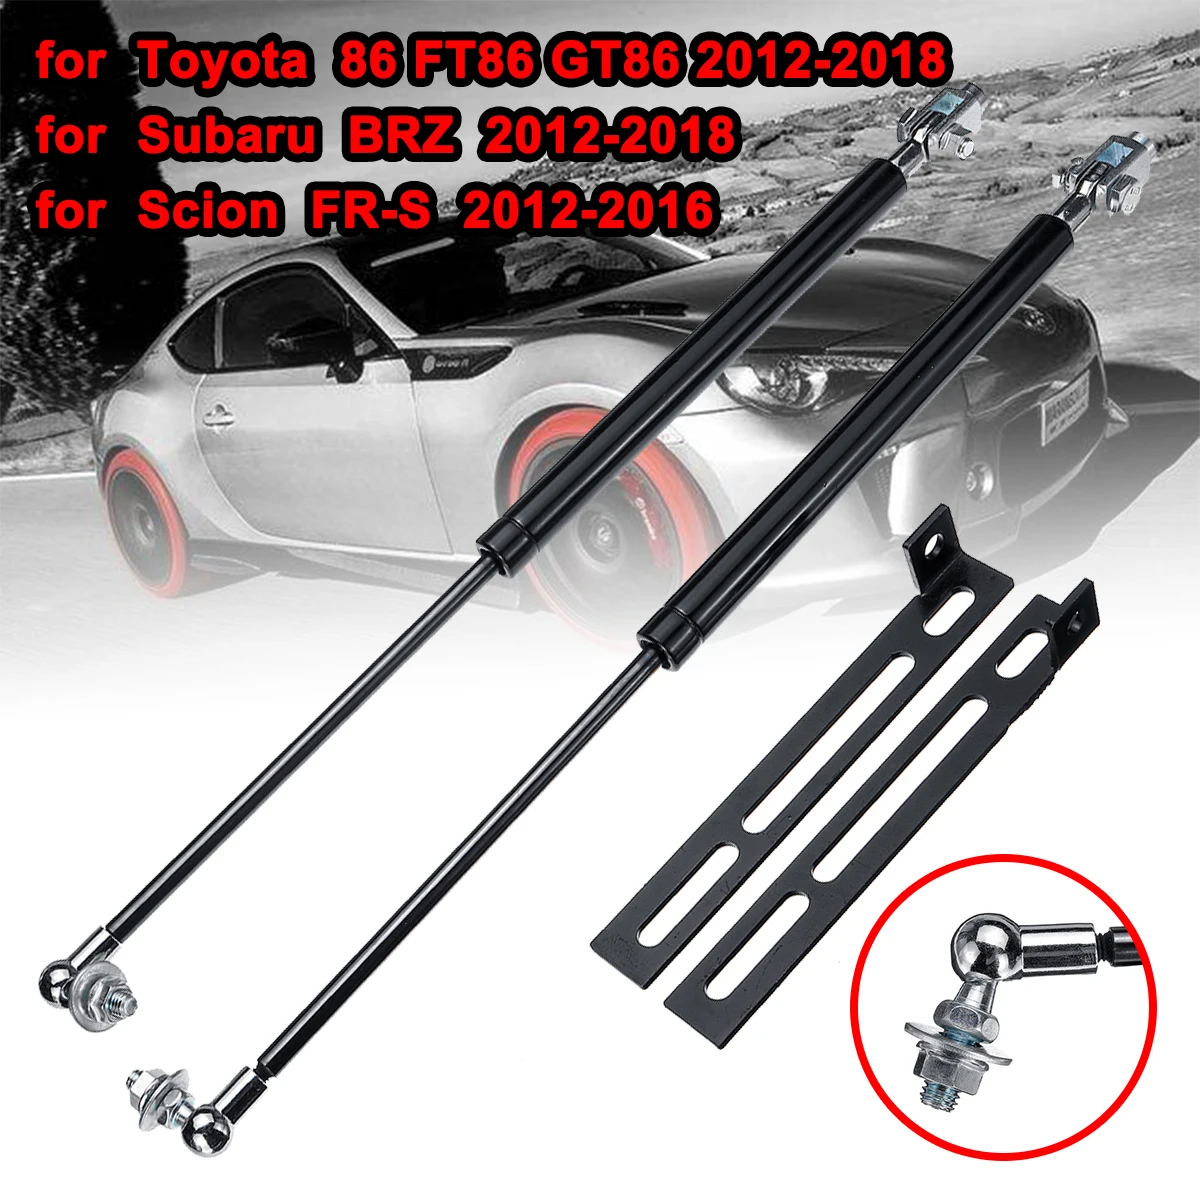 

1Pair Car Front Engine Hood Lift Supports Props Rod Arm Gas Springs Shocks Strut For Toyota 86 FT86 GT86 Subaru BRZ Scion FR-S